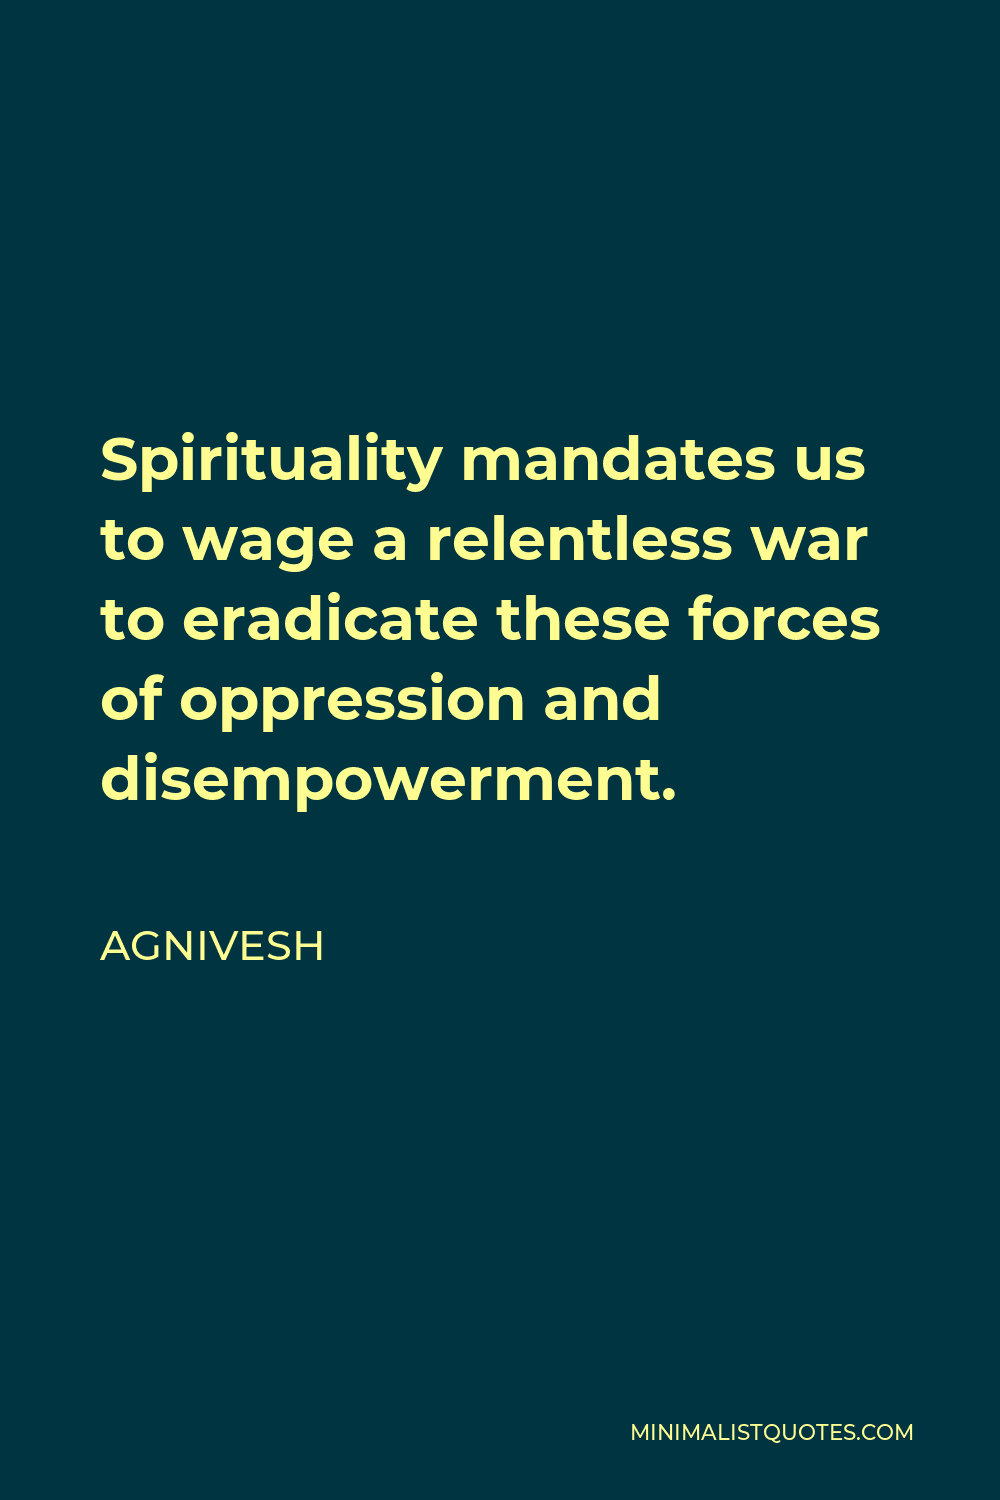 Agnivesh Quote - Spirituality mandates us to wage a relentless war to eradicate these forces of oppression and disempowerment.